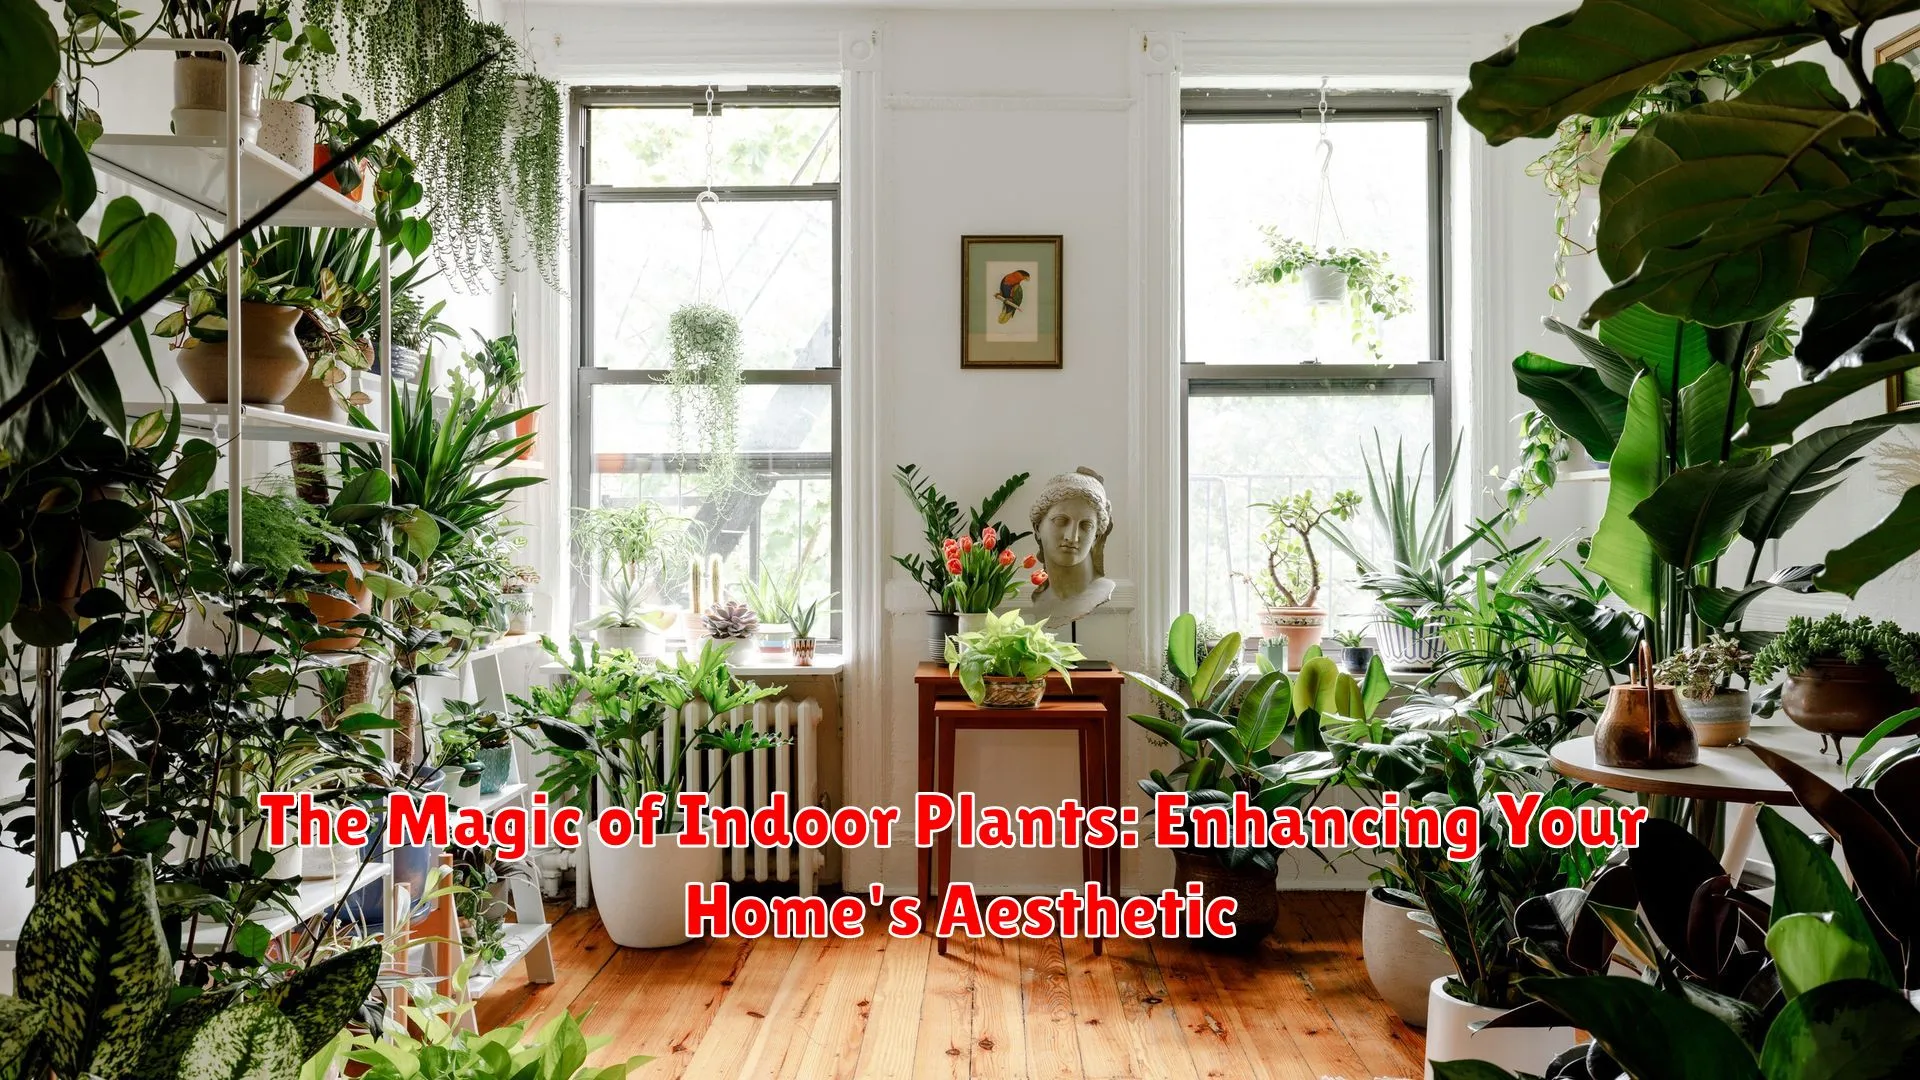 The Magic of Indoor Plants: Enhancing Your Home's Aesthetic